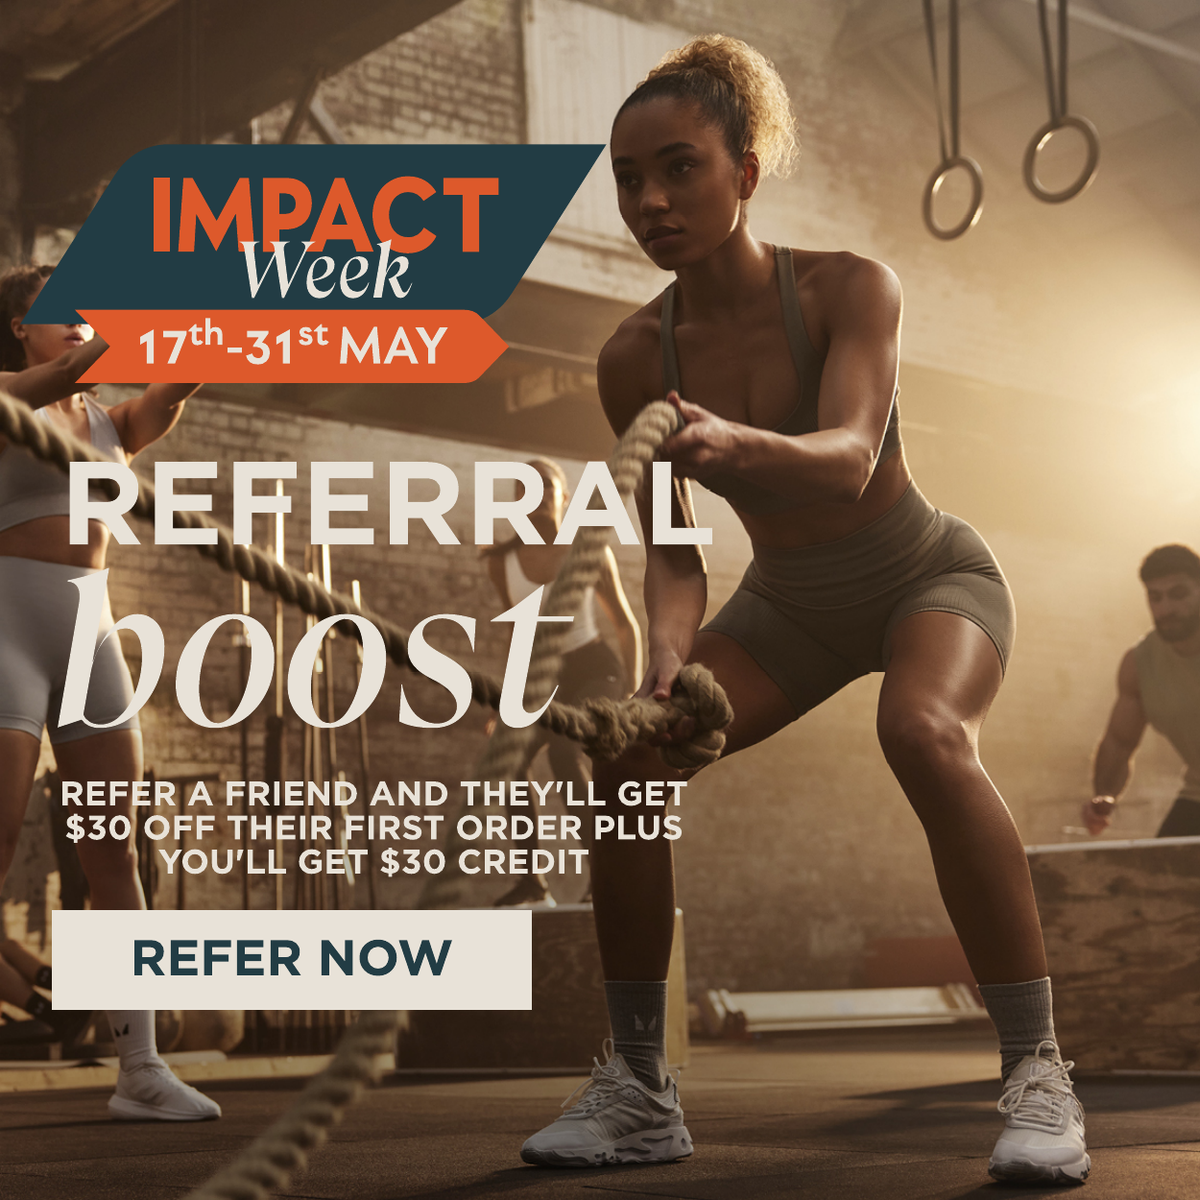 Boosted refer a friend and earn $30 for every friend successfully referred. Plus they get $30 off their first order.